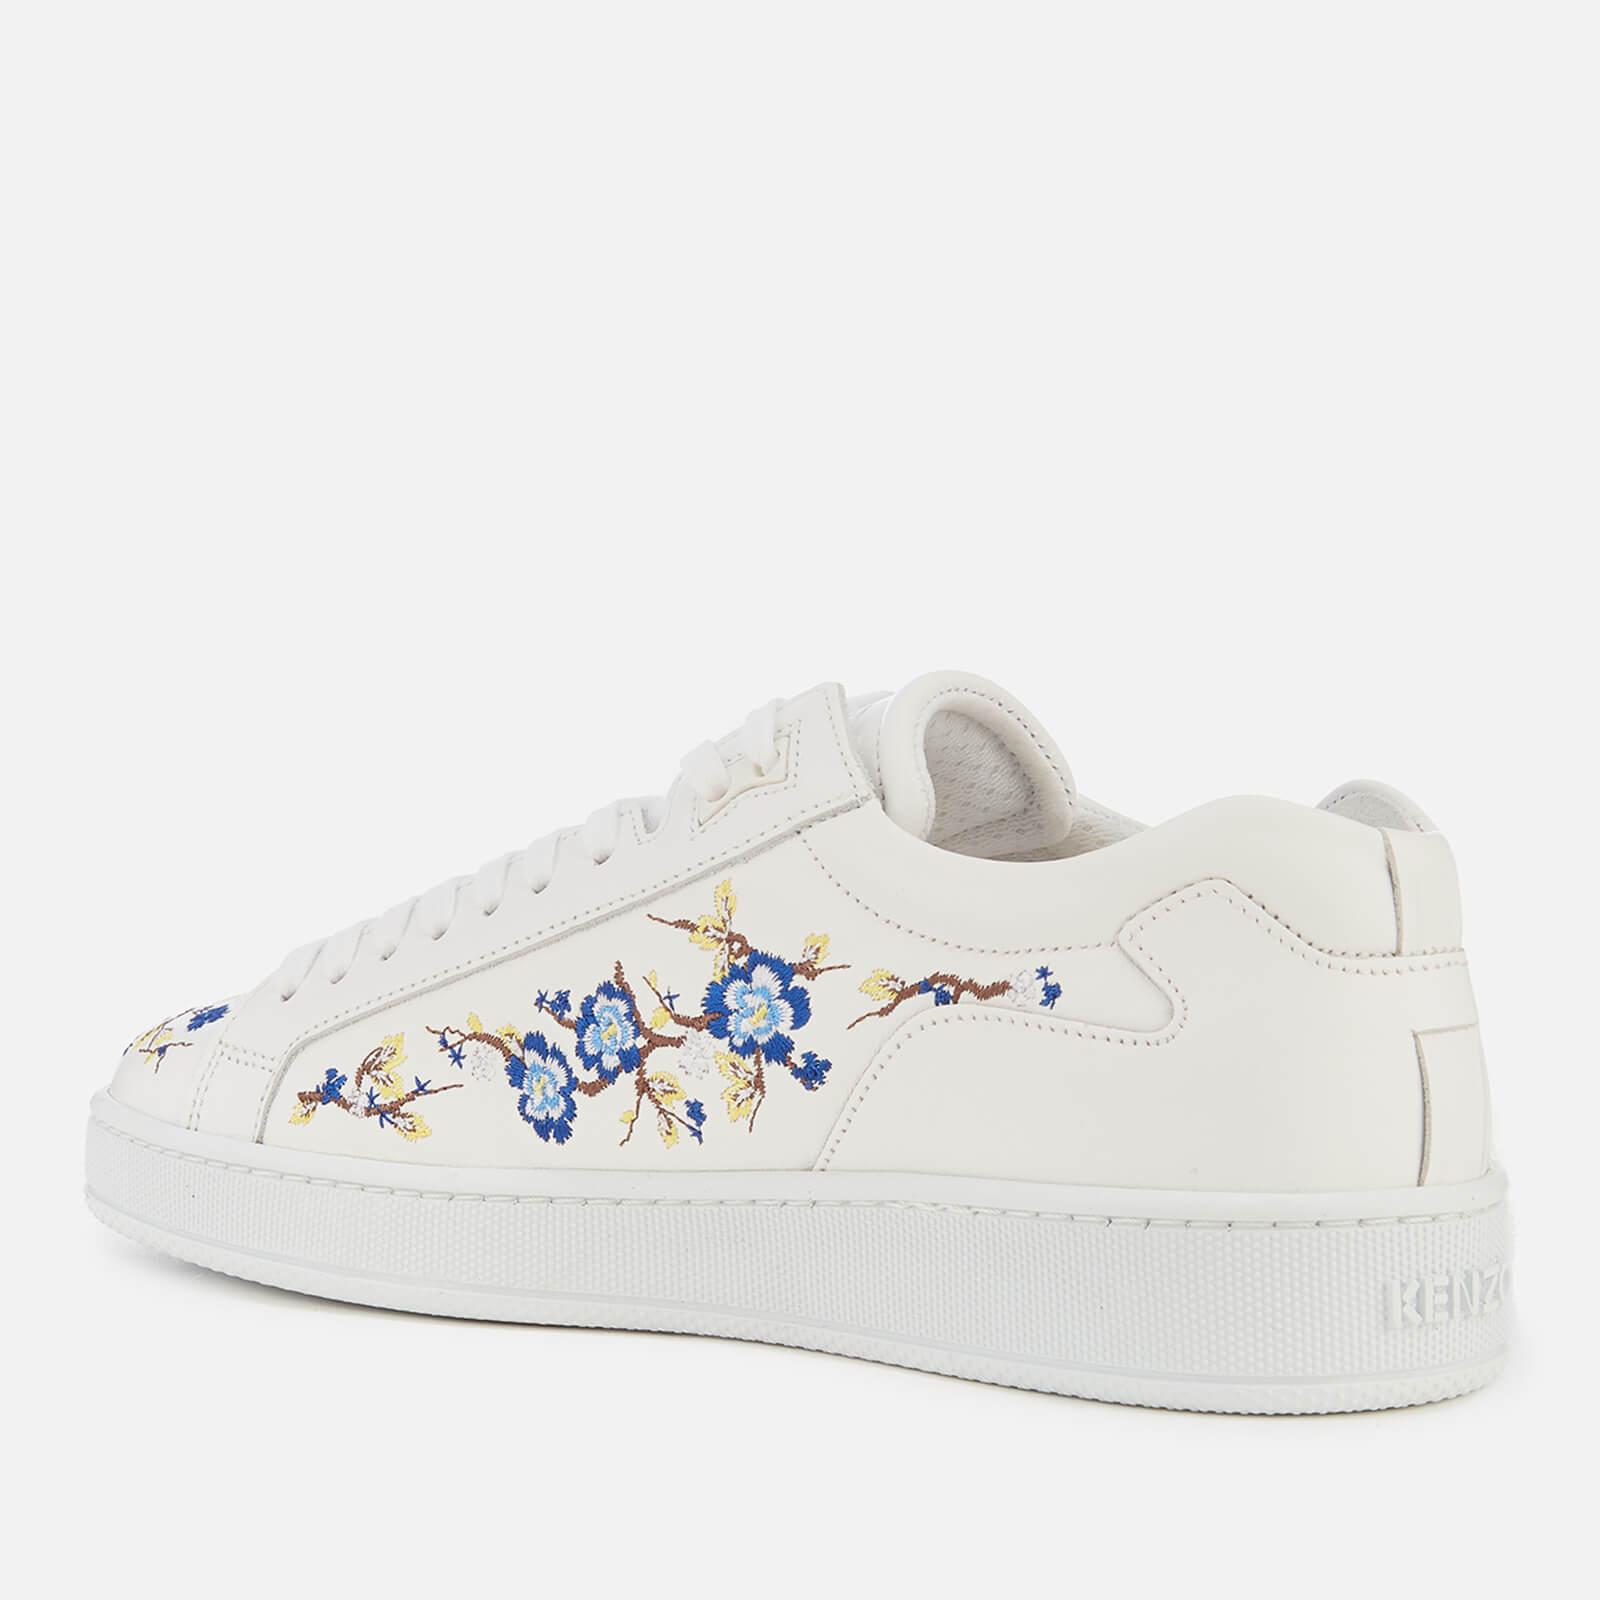 KENZO Tennis Flowers Embroidered Trainers in White | Lyst Canada